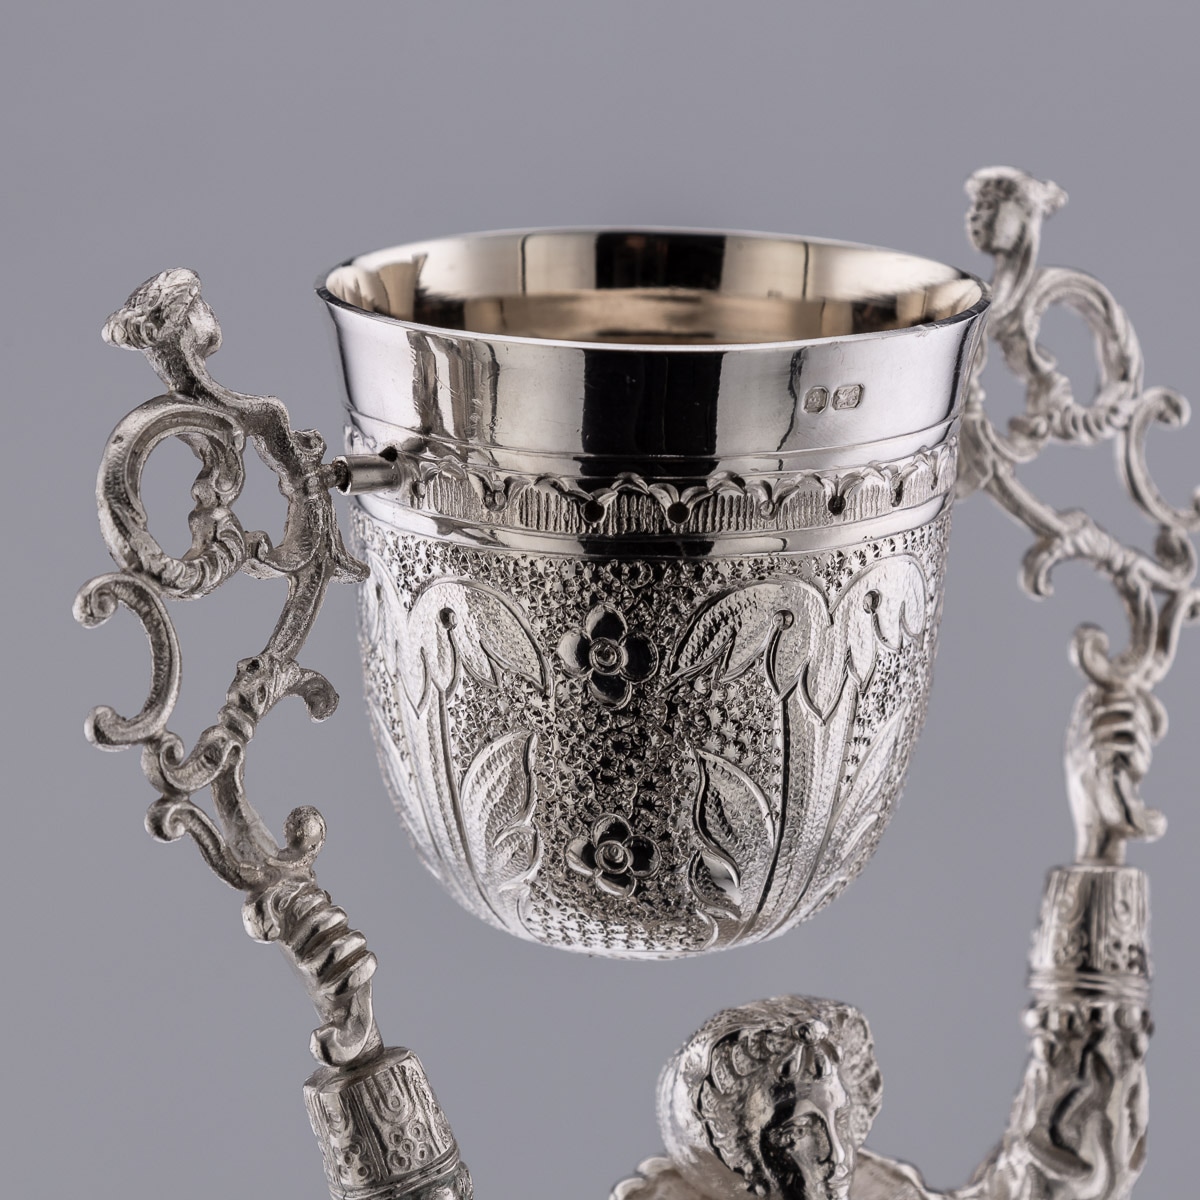 A ROYAL WEDDING SOLID STERLING SILVER NOVELTY WAGER CUP, LONDON, C. 1973 - Image 20 of 23